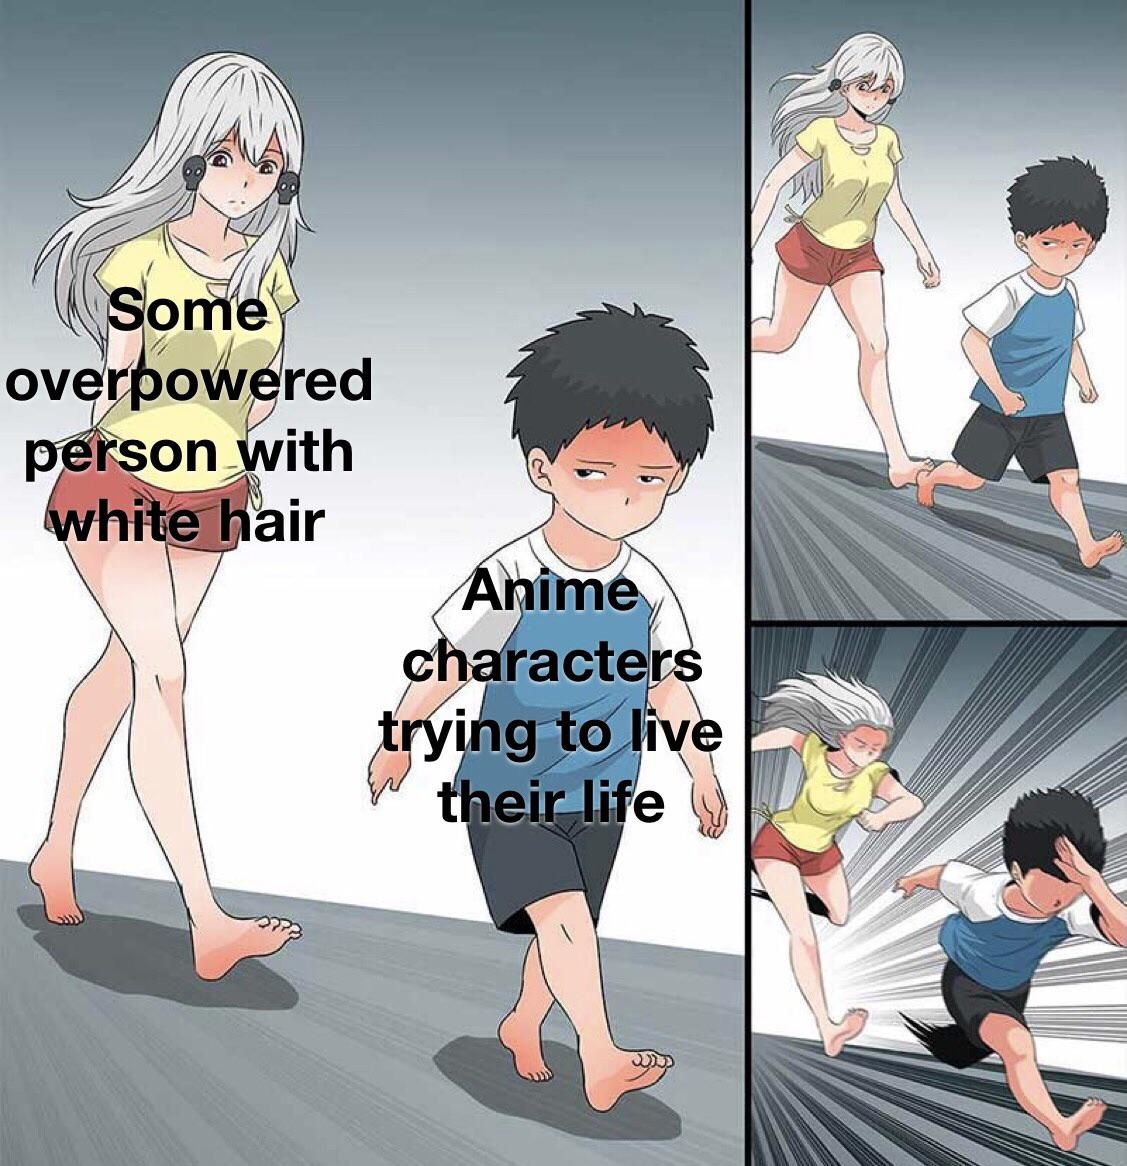 If they have white hair your best choice is to run